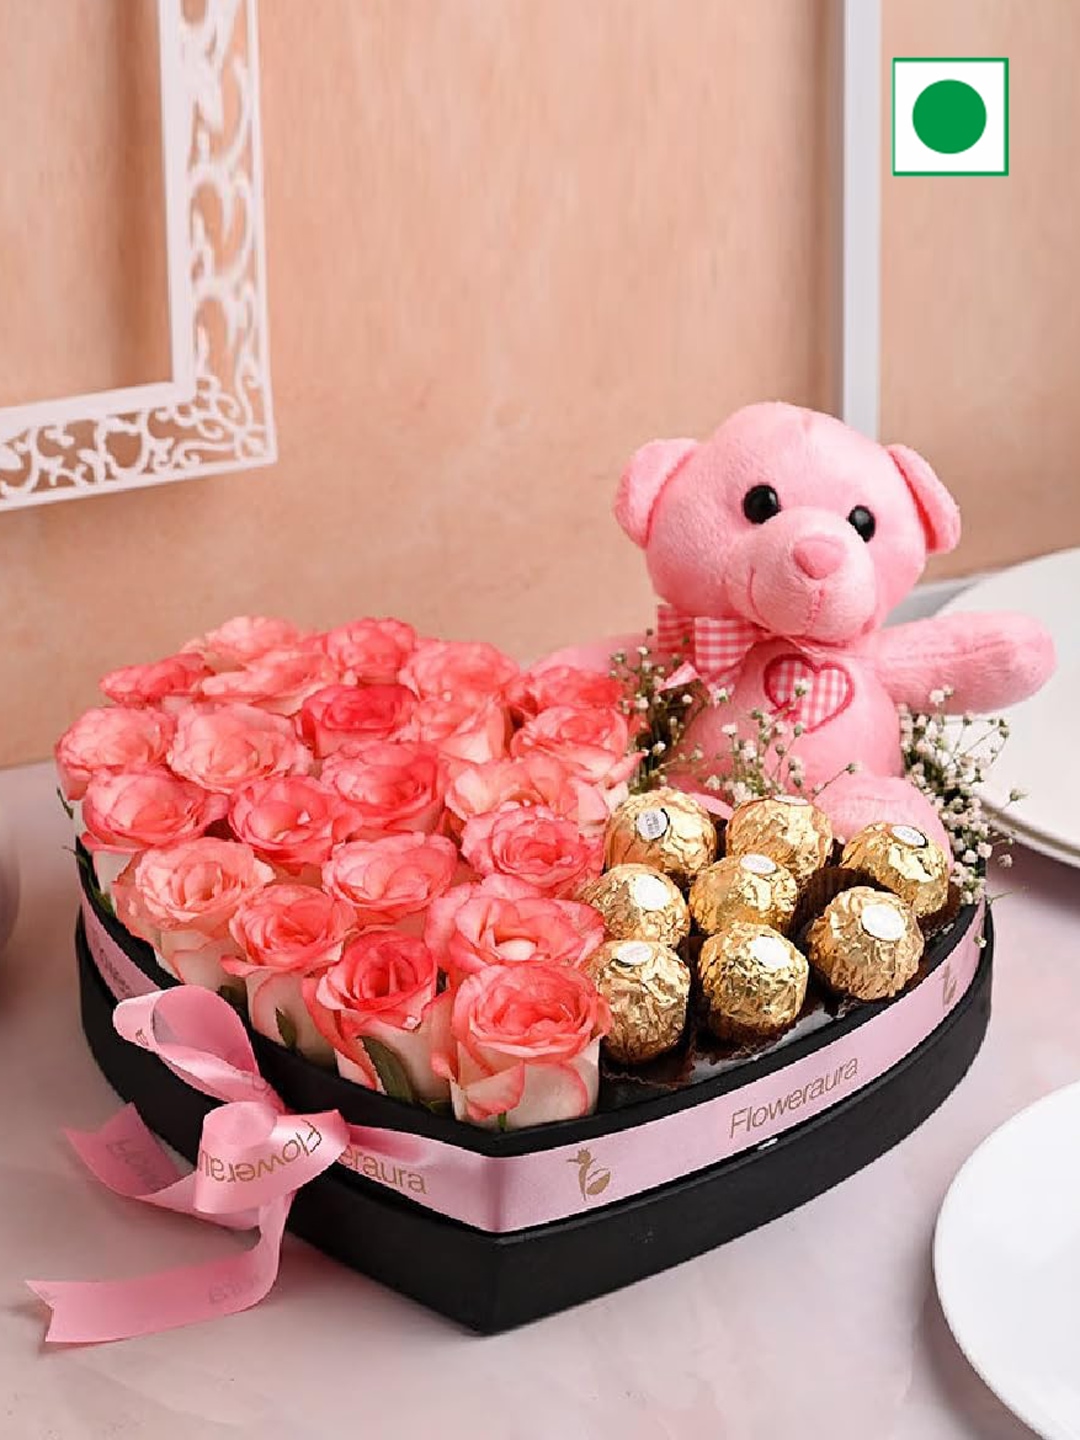 

Floweraura Set of 3 Rose Flowers With Chocolates & Cute Teddy Gifts, Pink